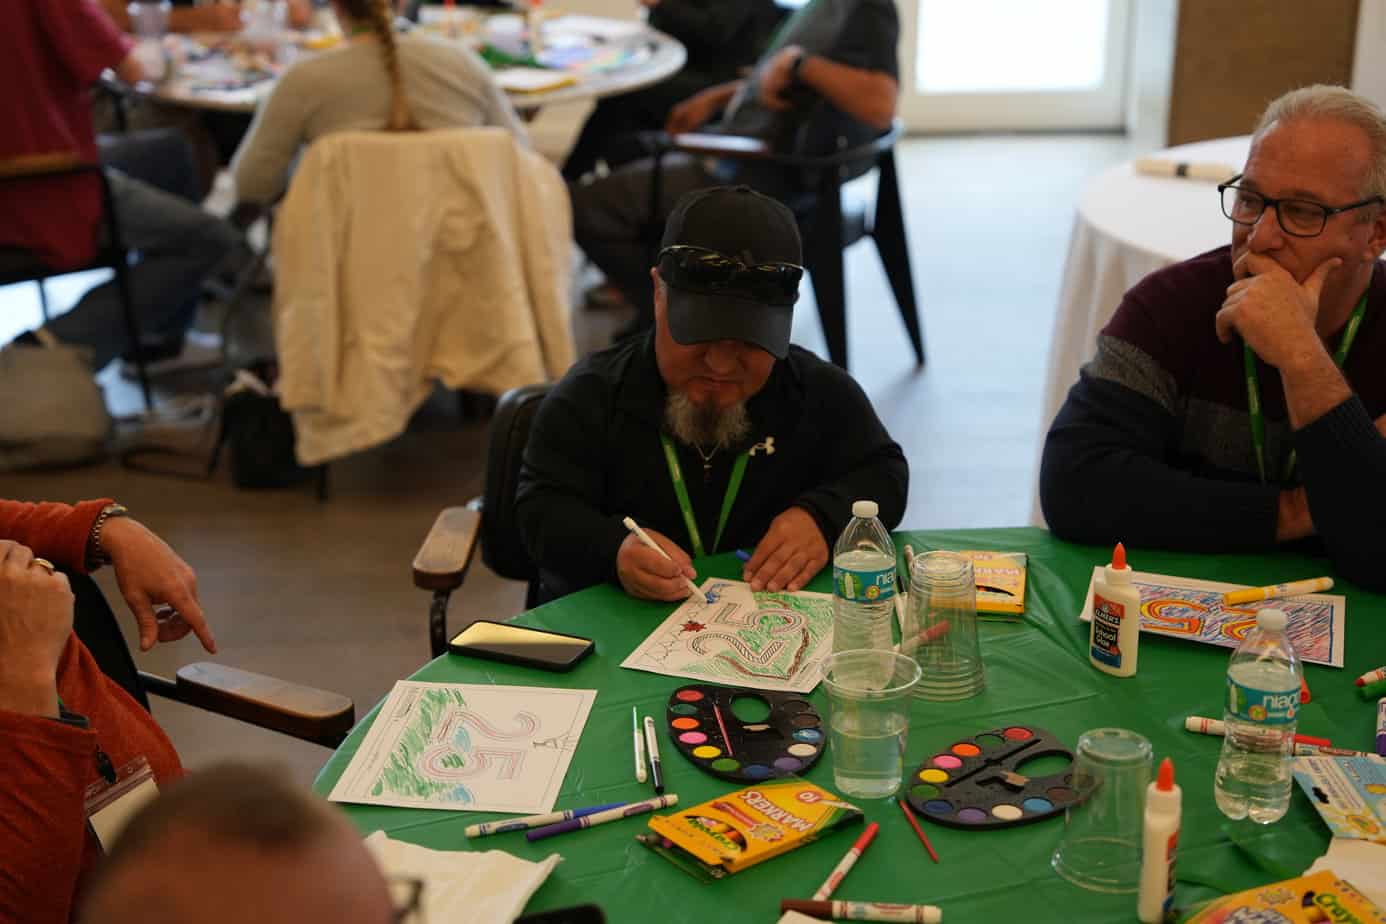 Creating art at Mountainside addiction treatment center in Canaan, CT.